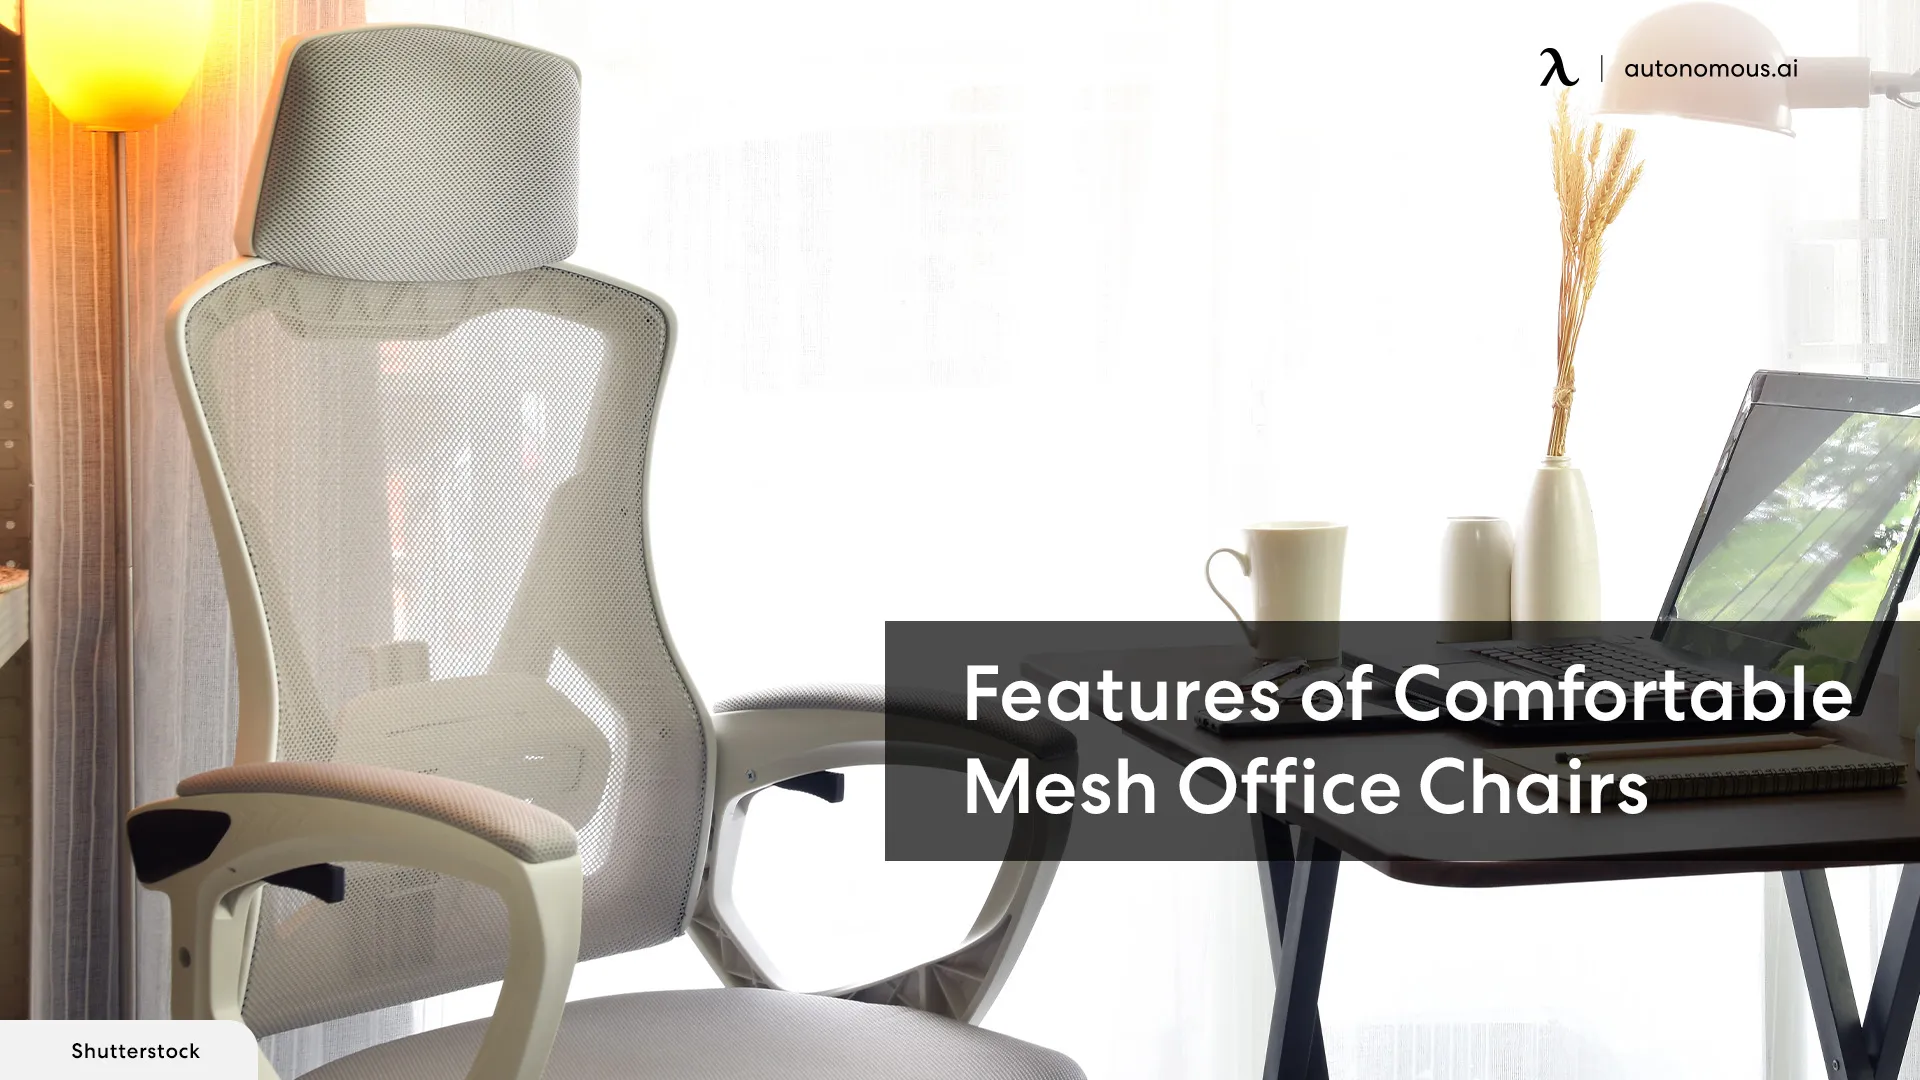 What Makes a Mesh Office Chair Comfortable?